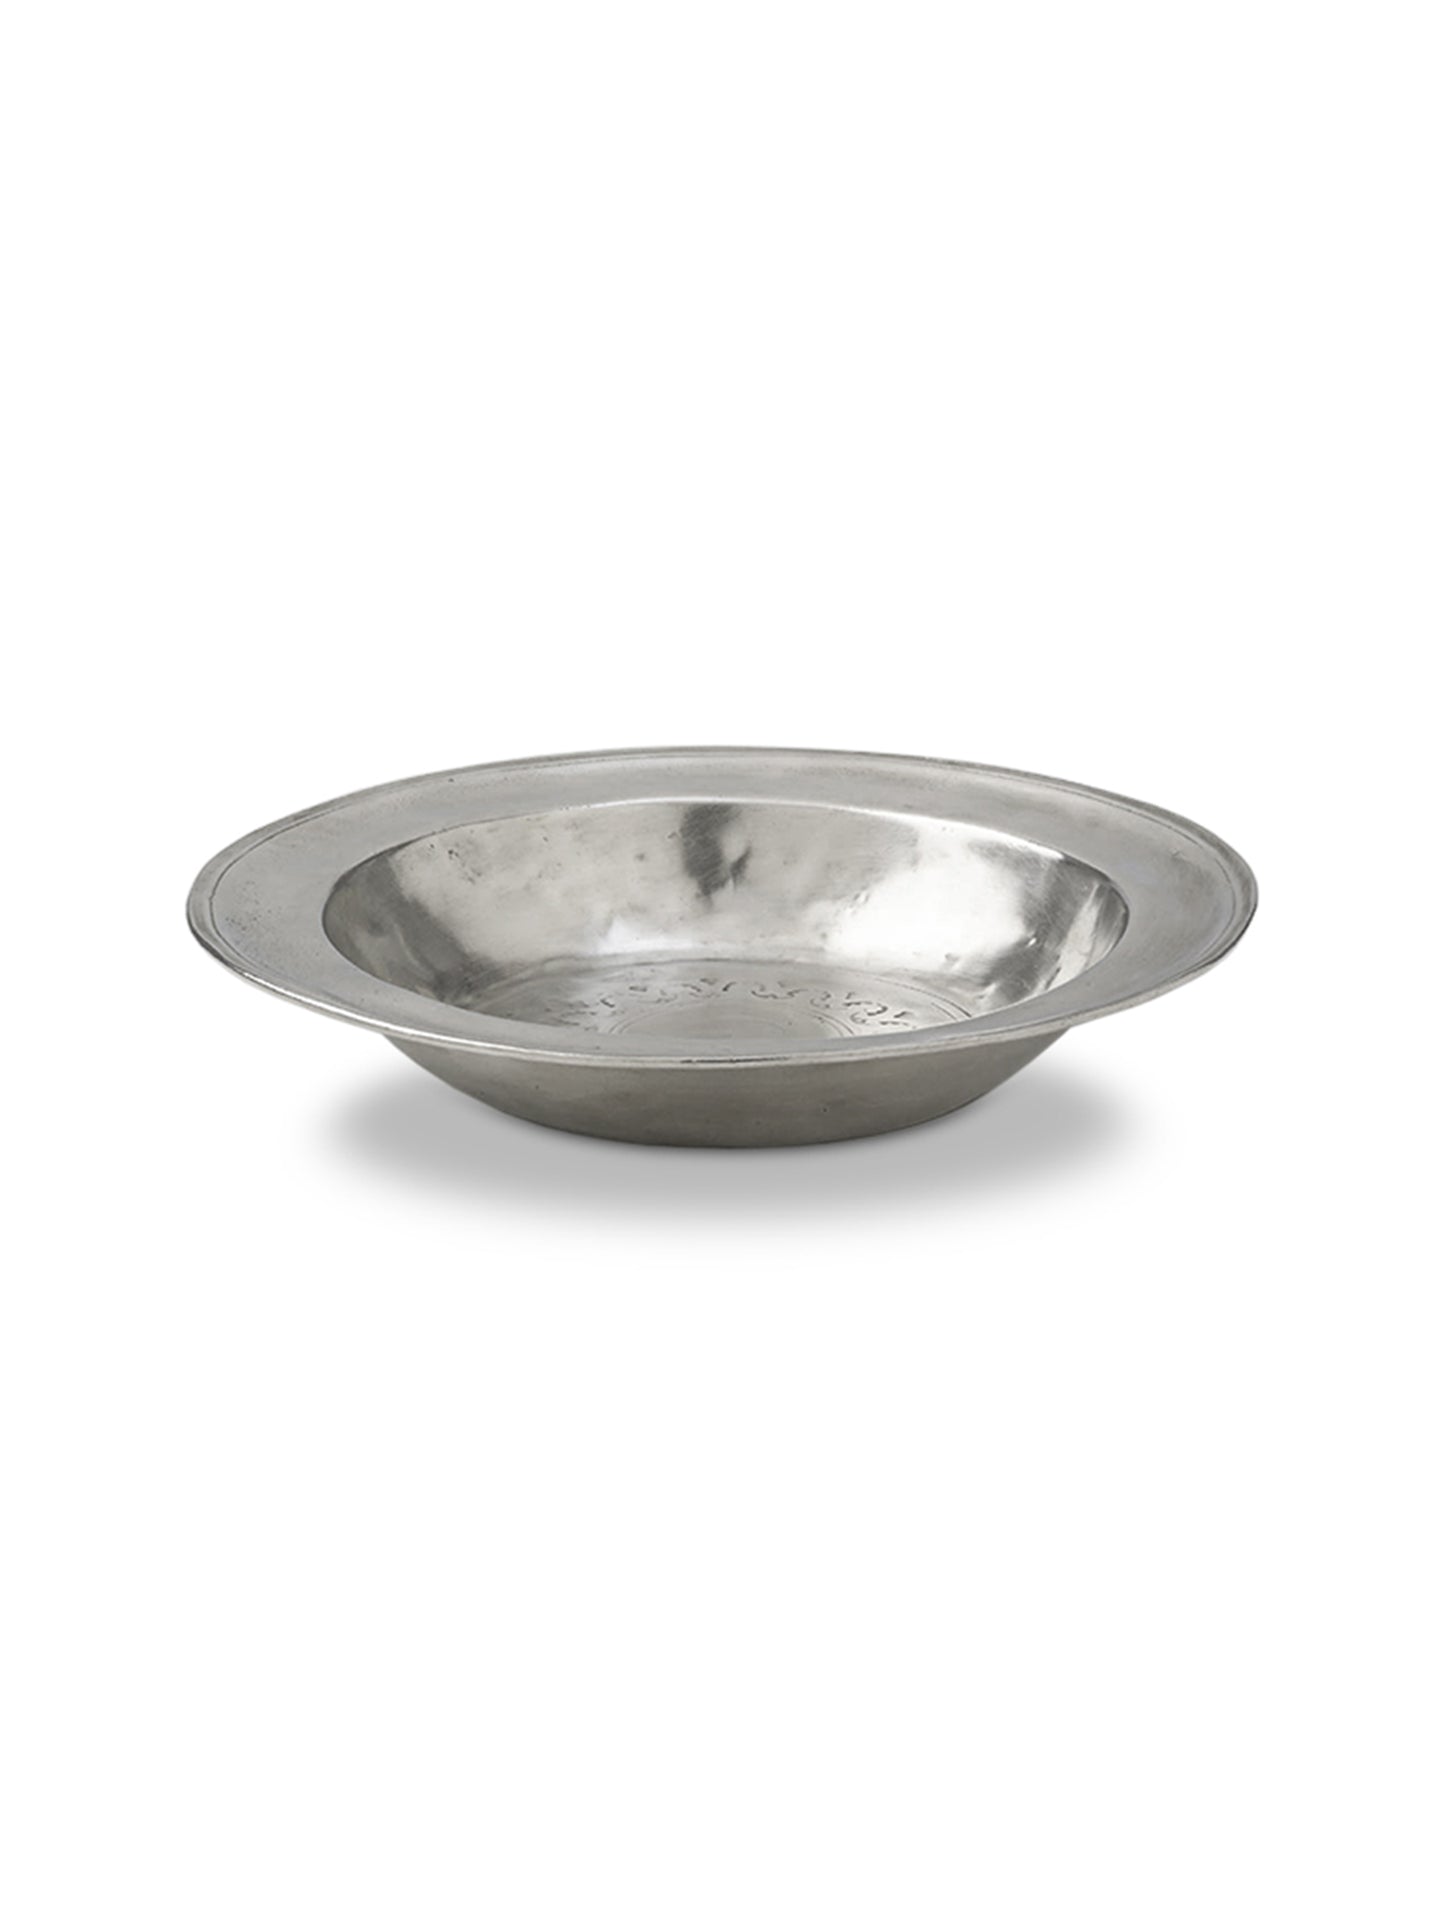 MATCH Pewter Small Wide Rimmed Bowl Weston Table